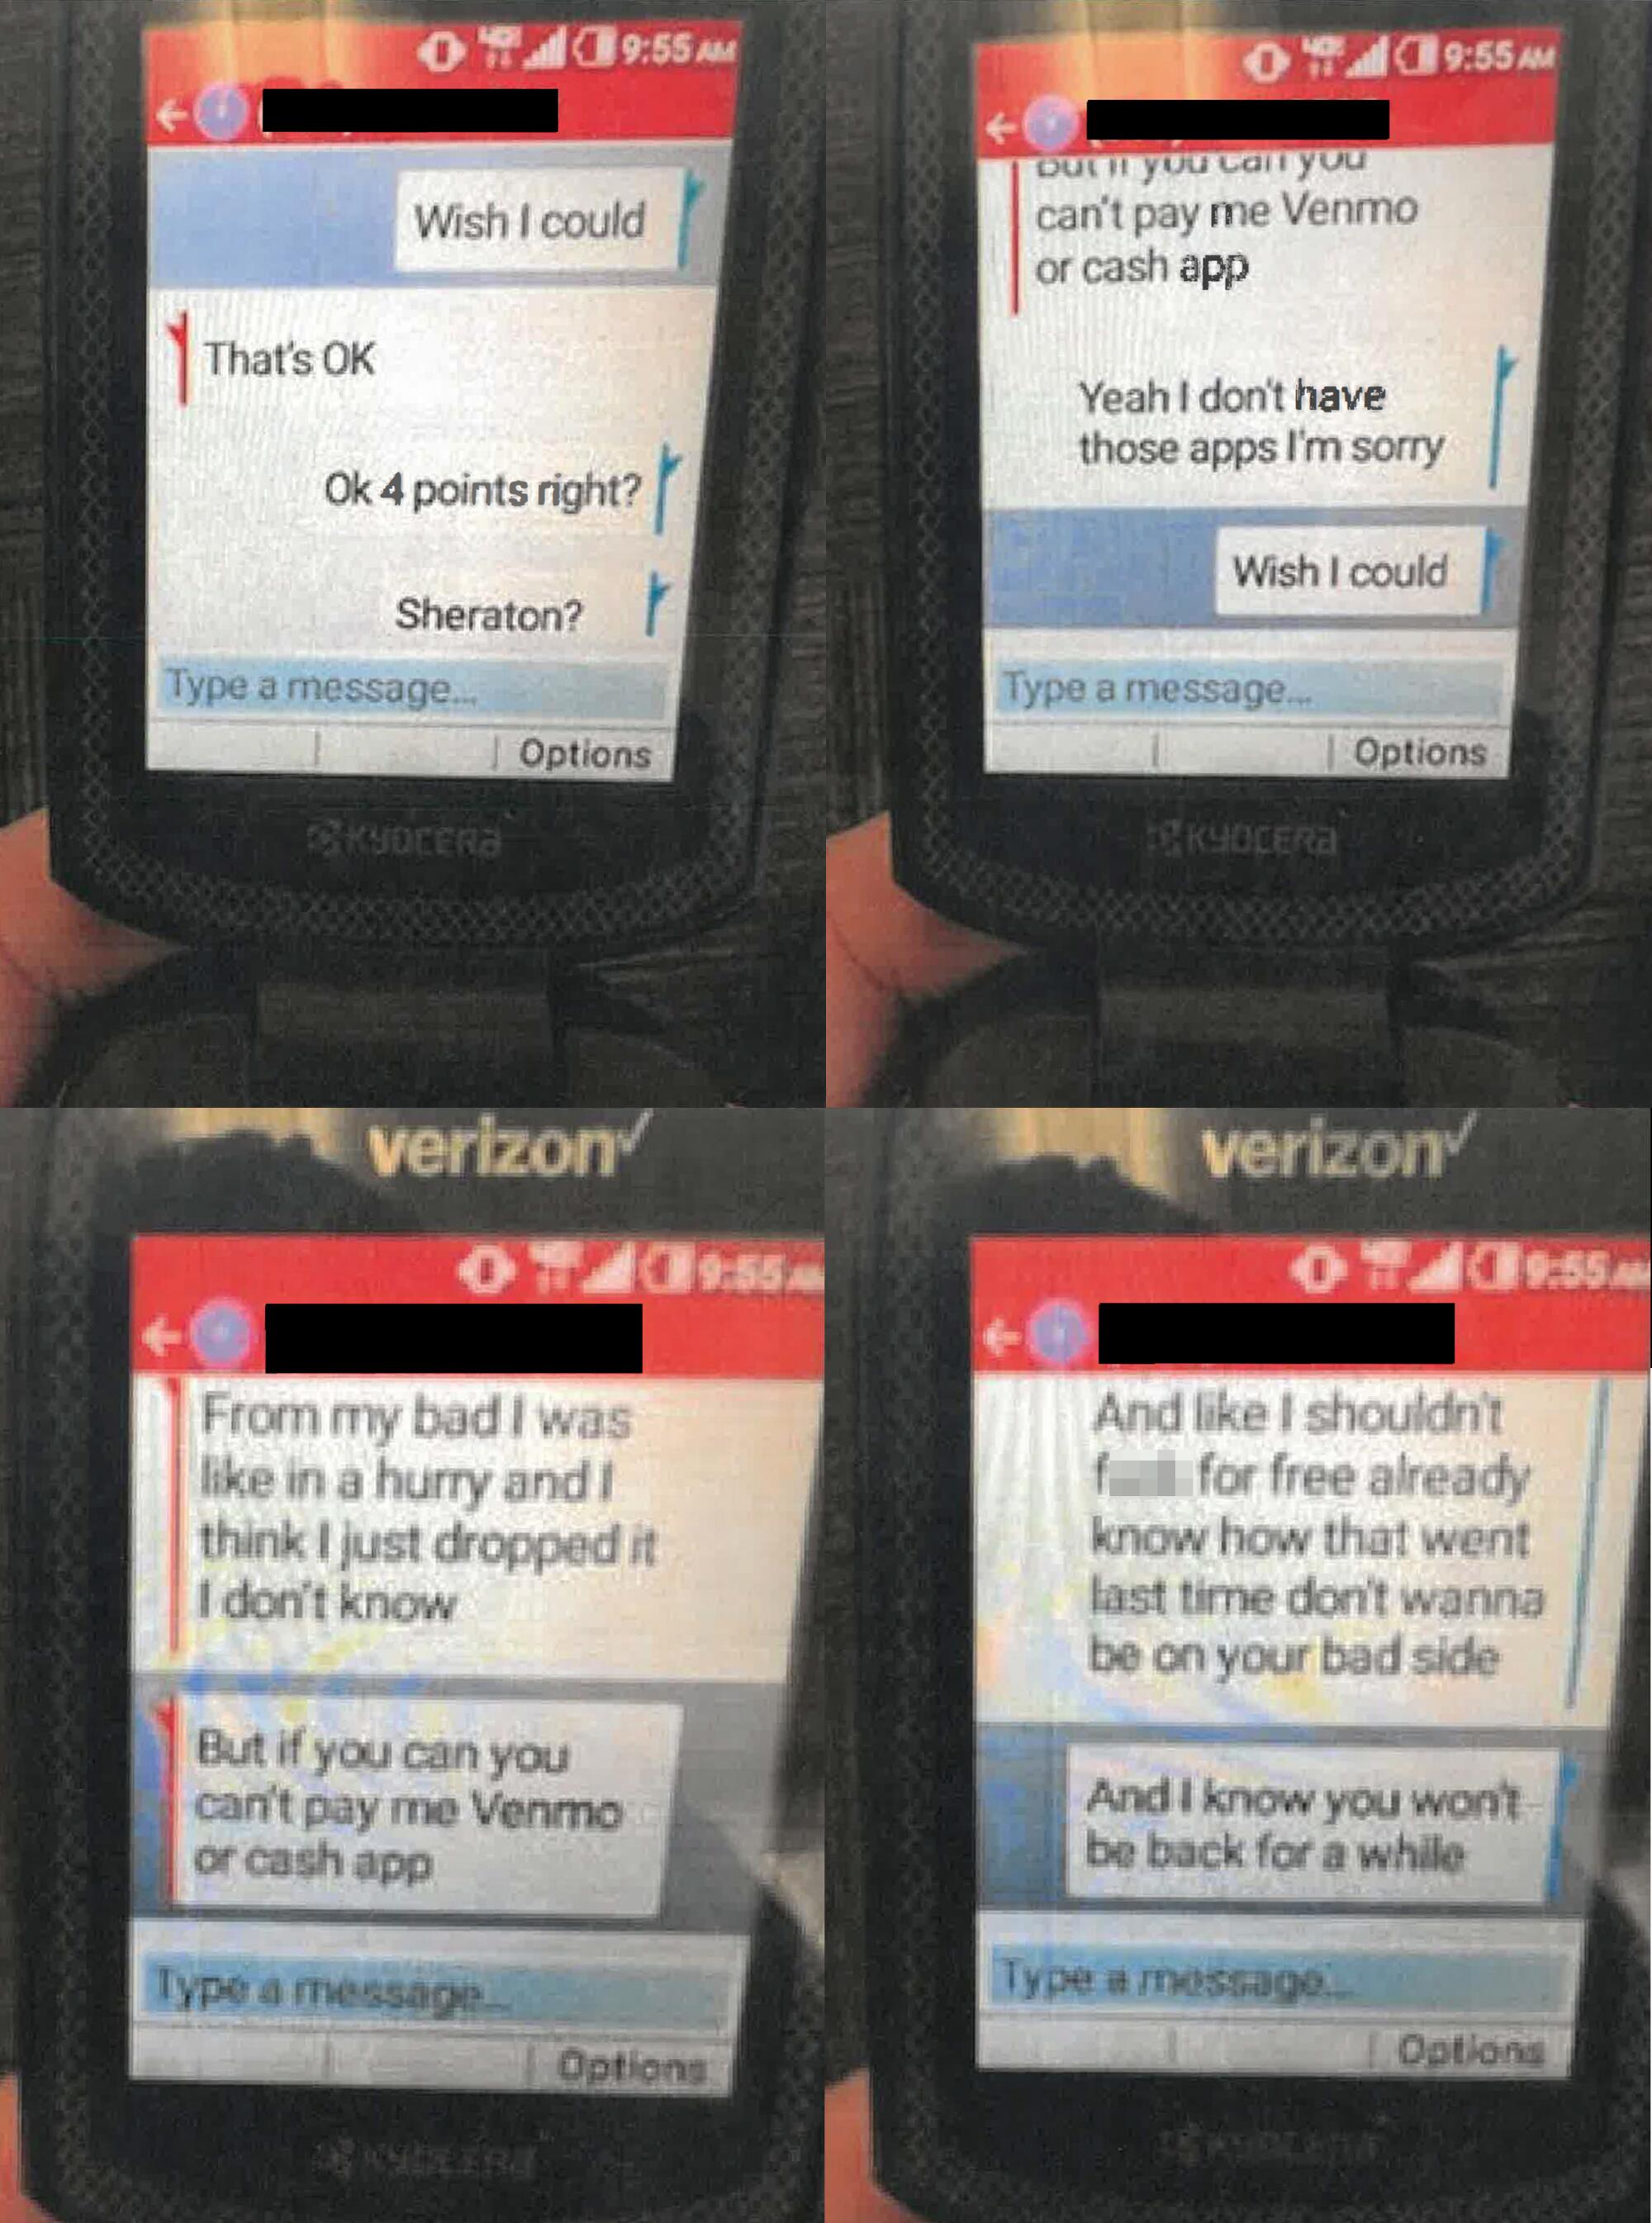 A series of text messages on a flip-phone screen regarding a solicitation for sex.